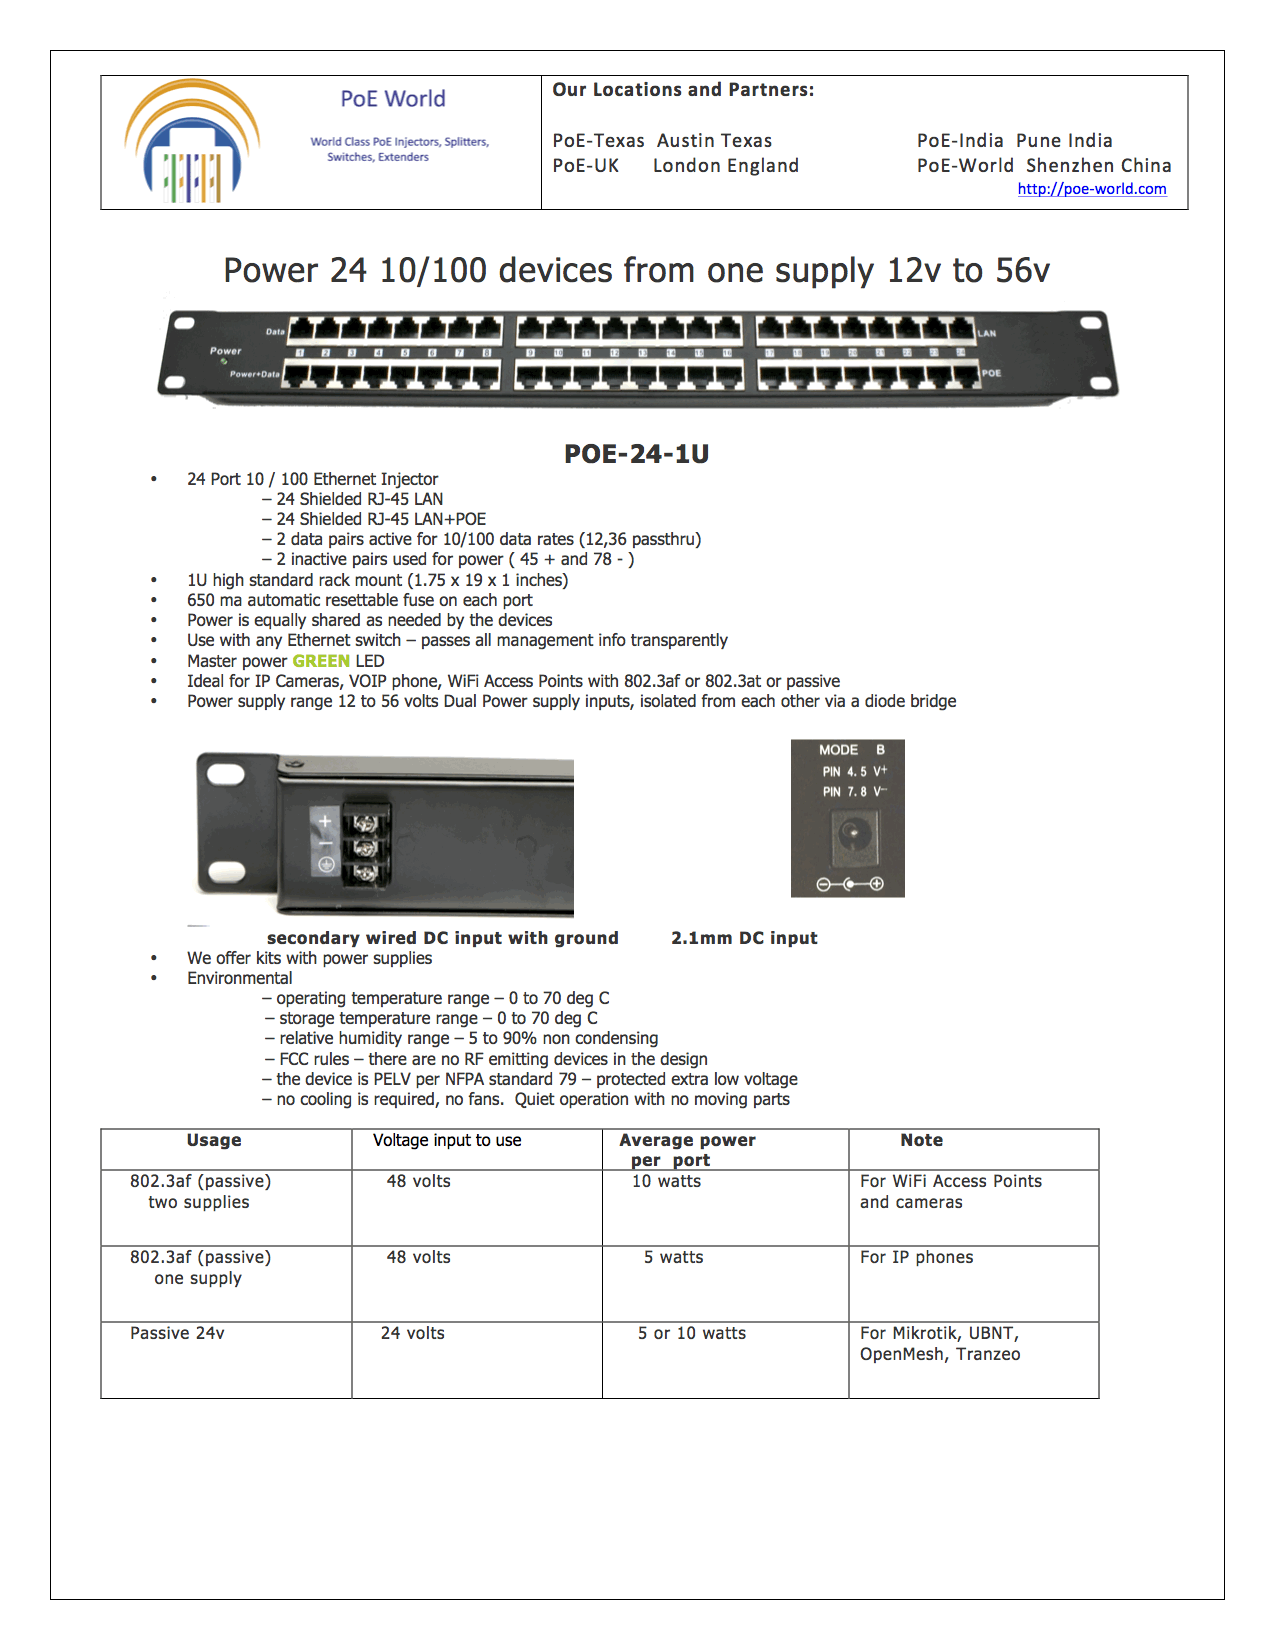 POE-24-1U 24 Port Passive PoE Injector 100mbps Data Speed Mode B Operation 12-56V Power Input - Power Supply Not Included